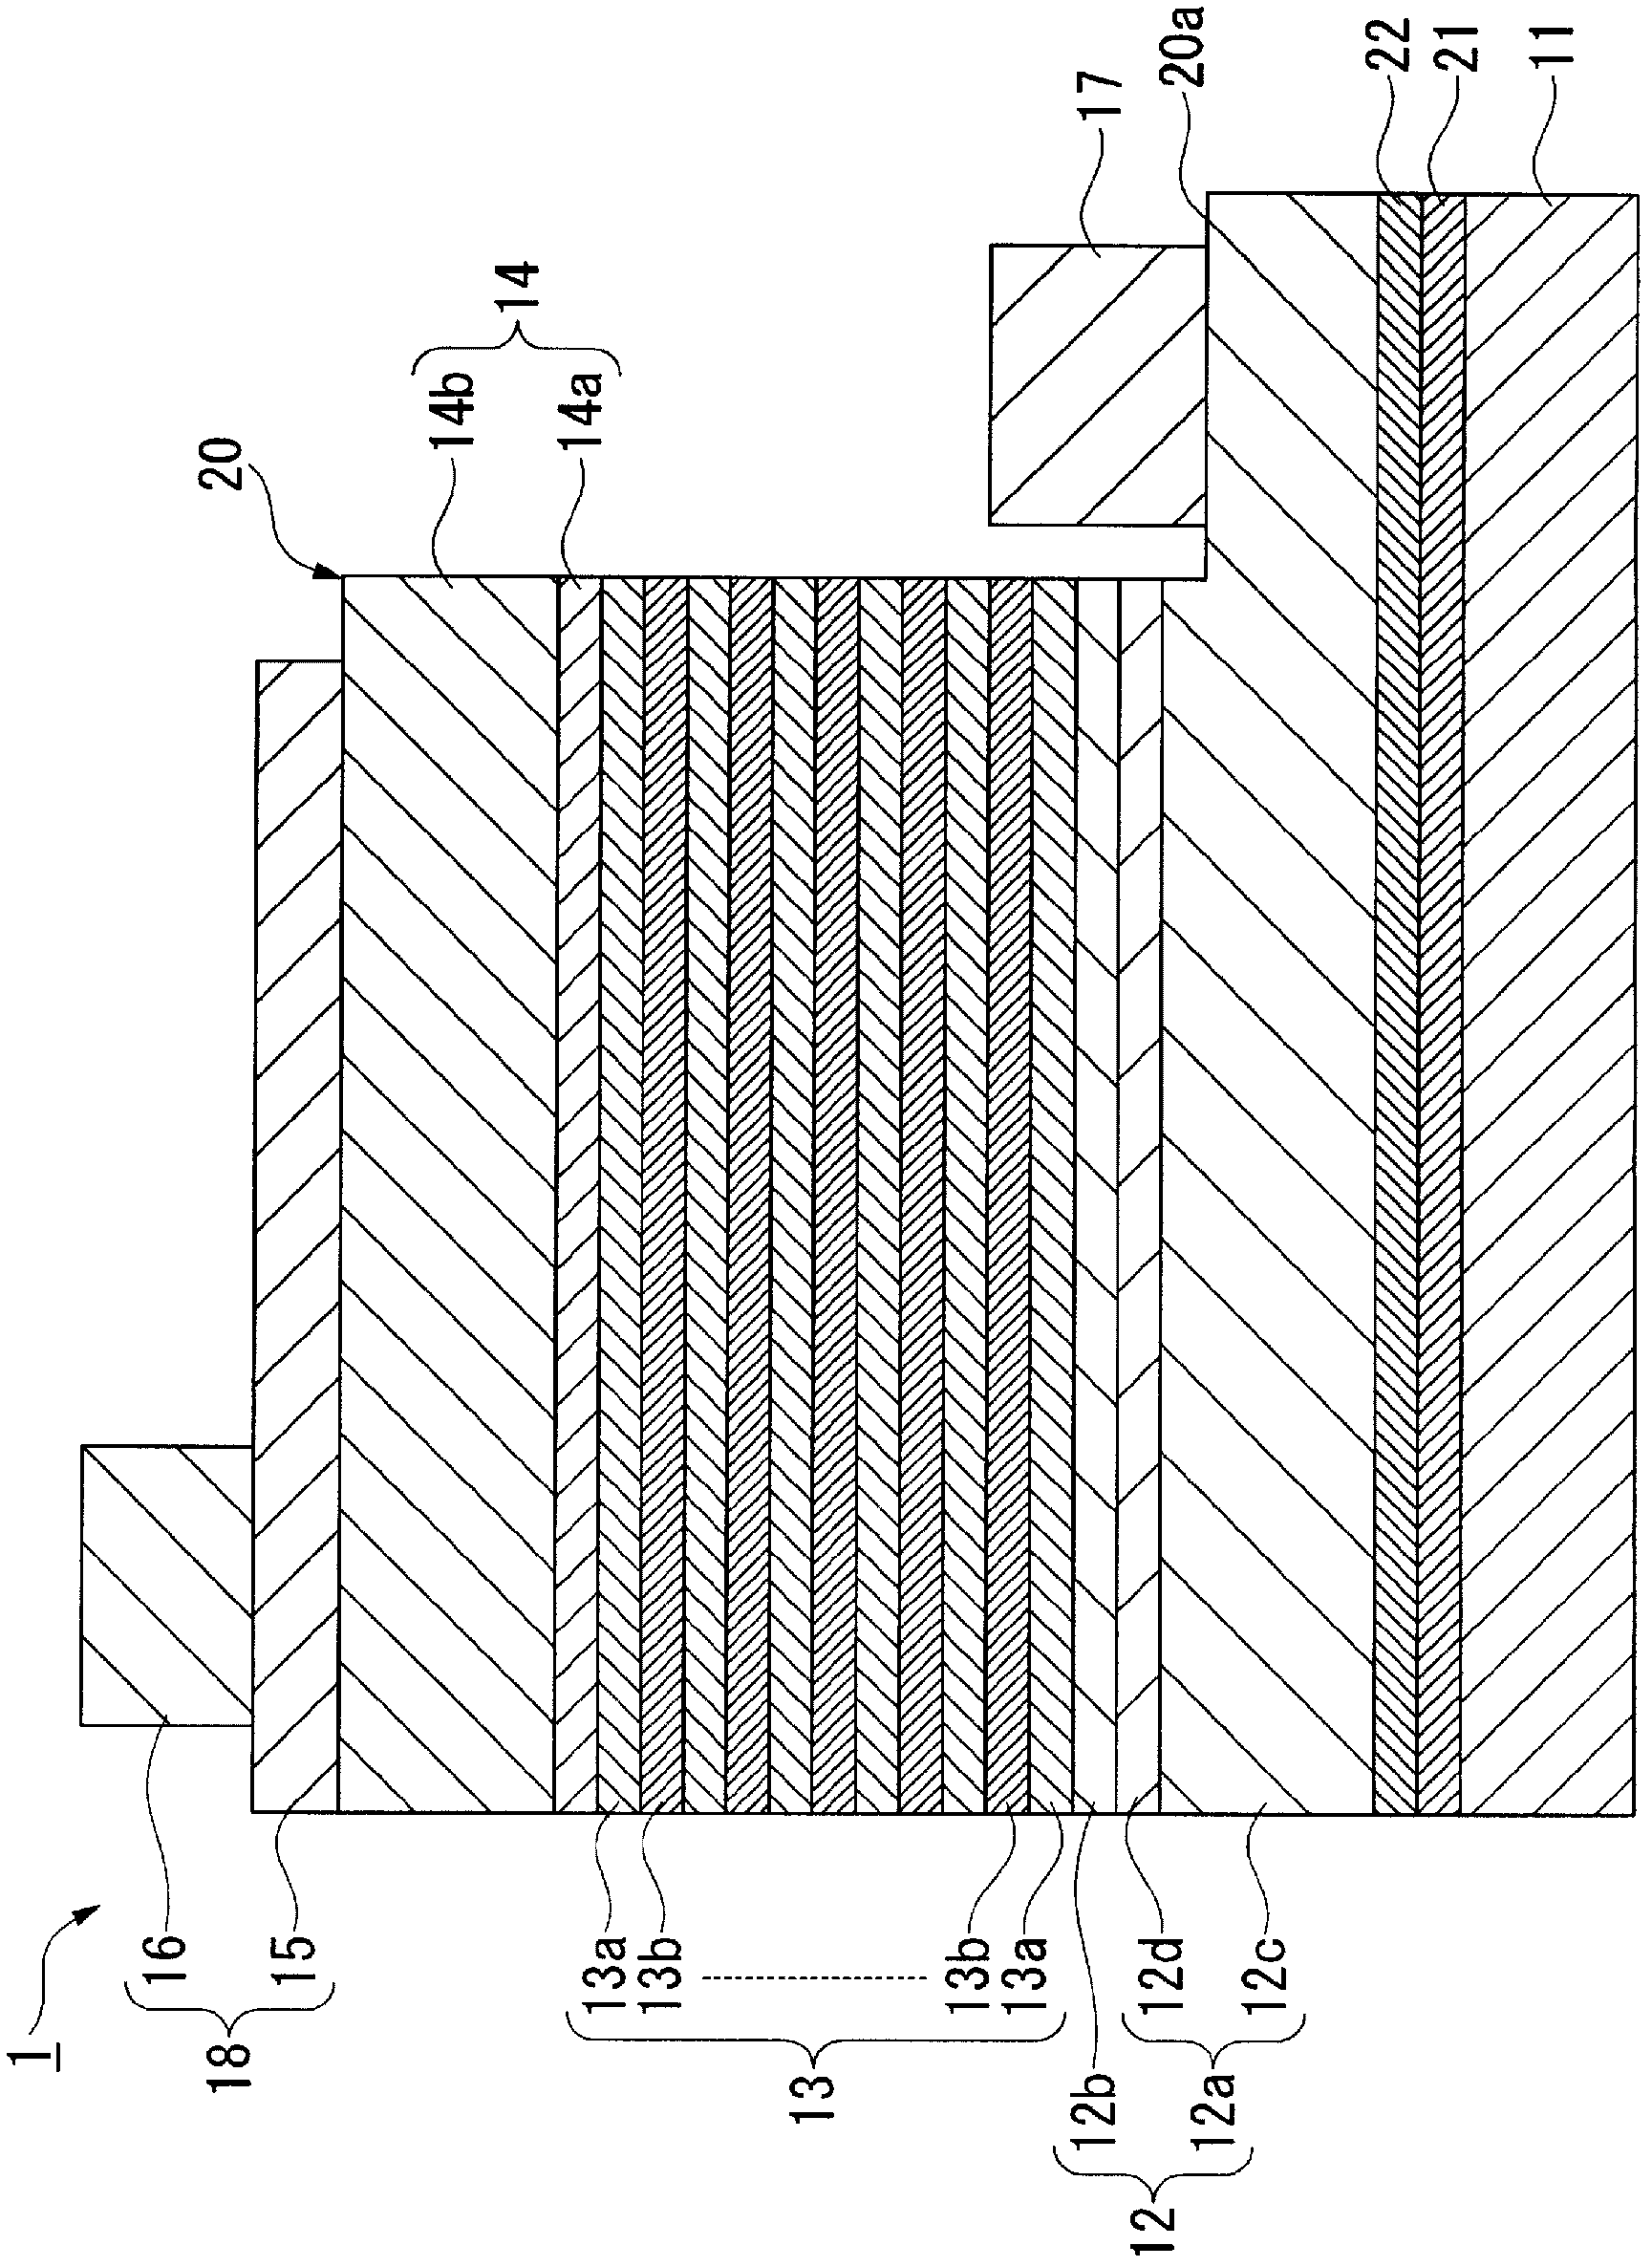 Semiconductor light-emitting element manufacturing method, lamp, electronic device, and mechanical apparatus